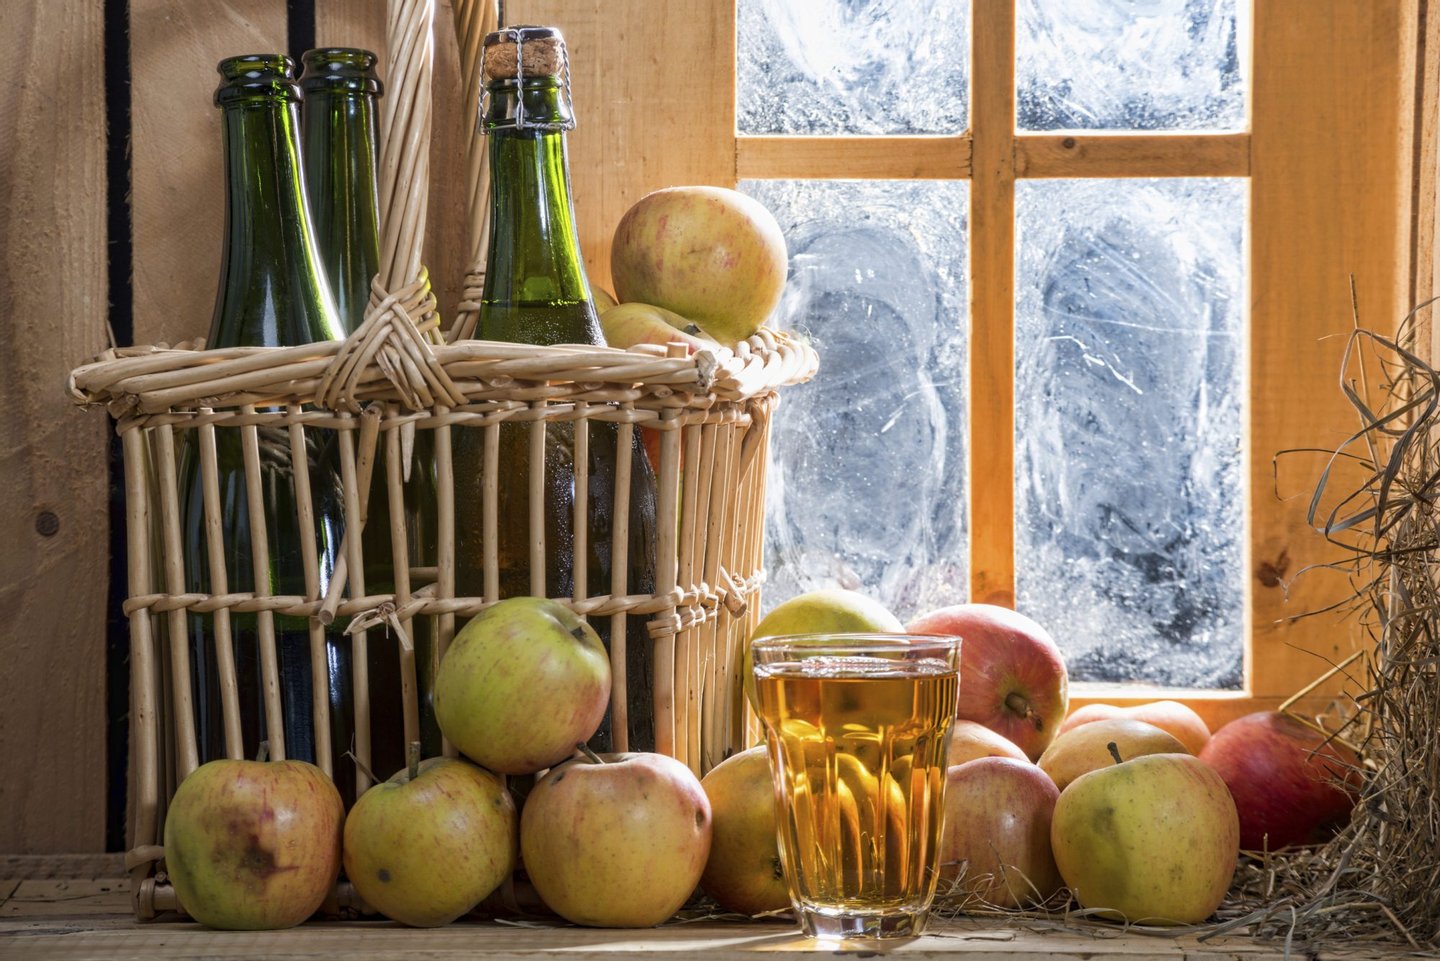 Normandy, Merchandise, Healthy Eating, Cider, Rustic, Organic, Ingredient, Freshness, Romance, Red, Brown, Glass - Material, Wood - Material, Cultures, Full, Nature, Rural Scene, Close-up, Brittany, Apple - Fruit, Fruit, Summer, Space, Sweet Food, Food, Alcohol, Juice, Drink, Bottle, Table, 